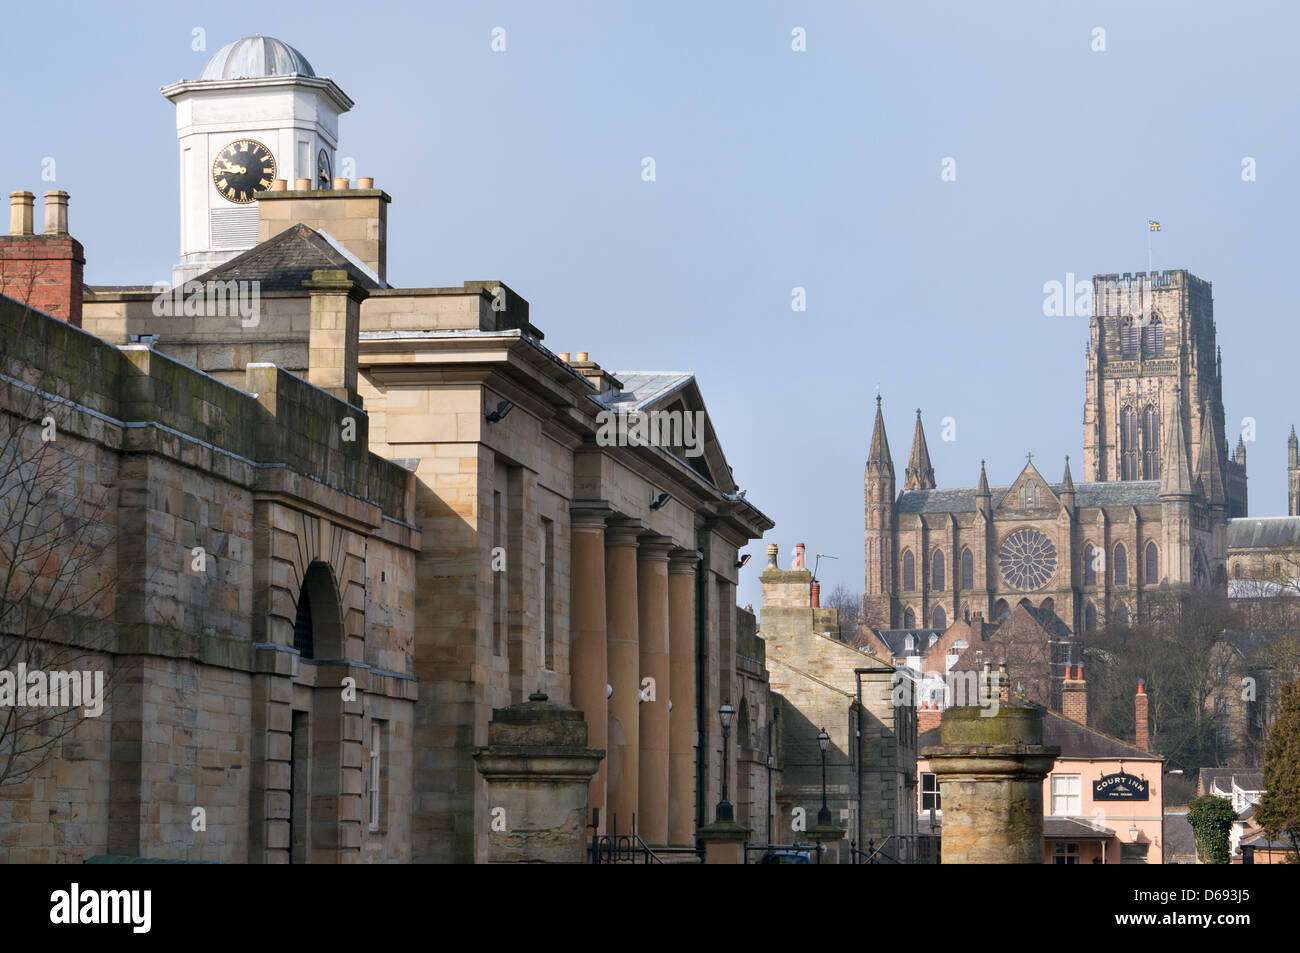 Old Elvet, Durham Crown Court e cattedrale North East England Regno Unito Foto Stock